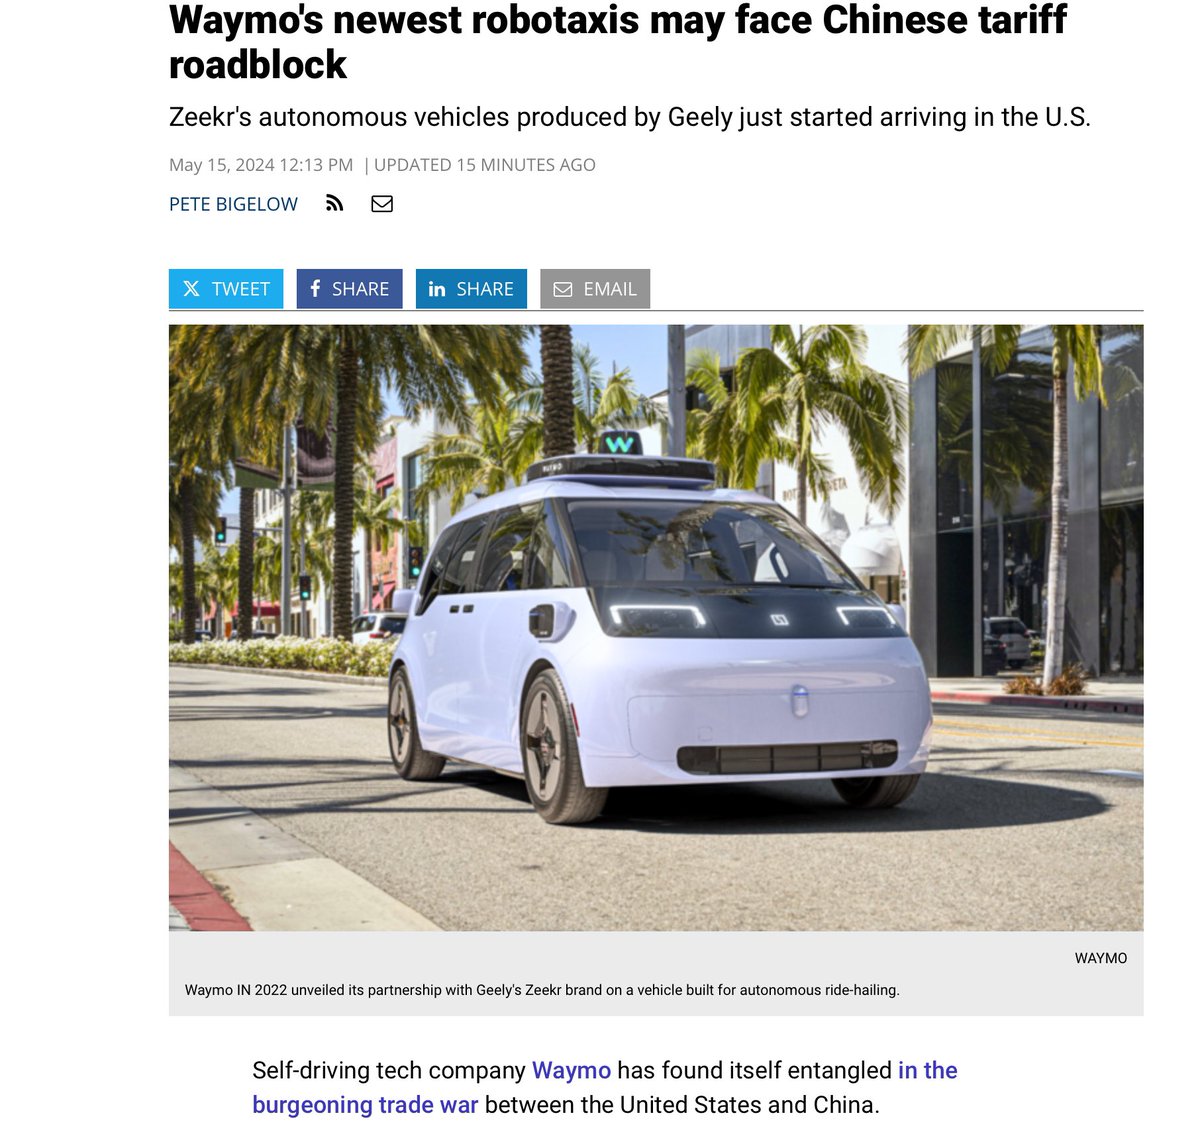 Waymo’s newest robotaxis may face Chinese tariff roadblock